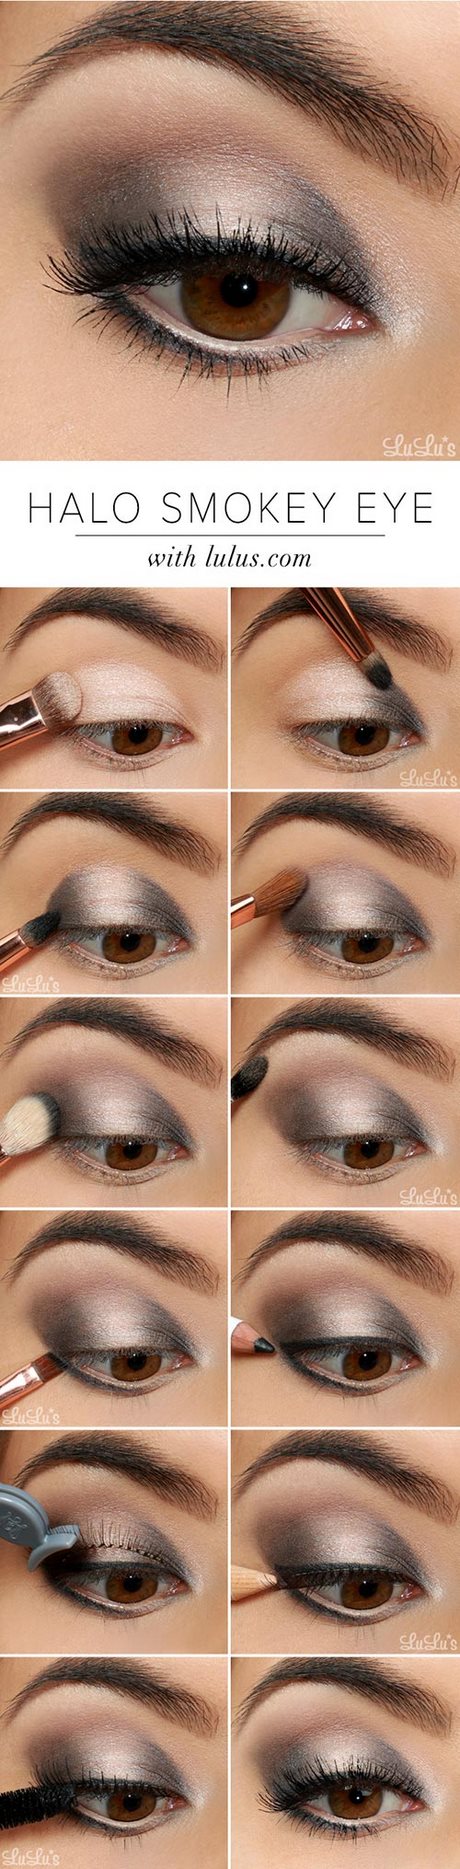 new-years-eve-makeup-tutorial-jaclyn-hill-10_2 New years eve make-up tutorial jaclyn hill